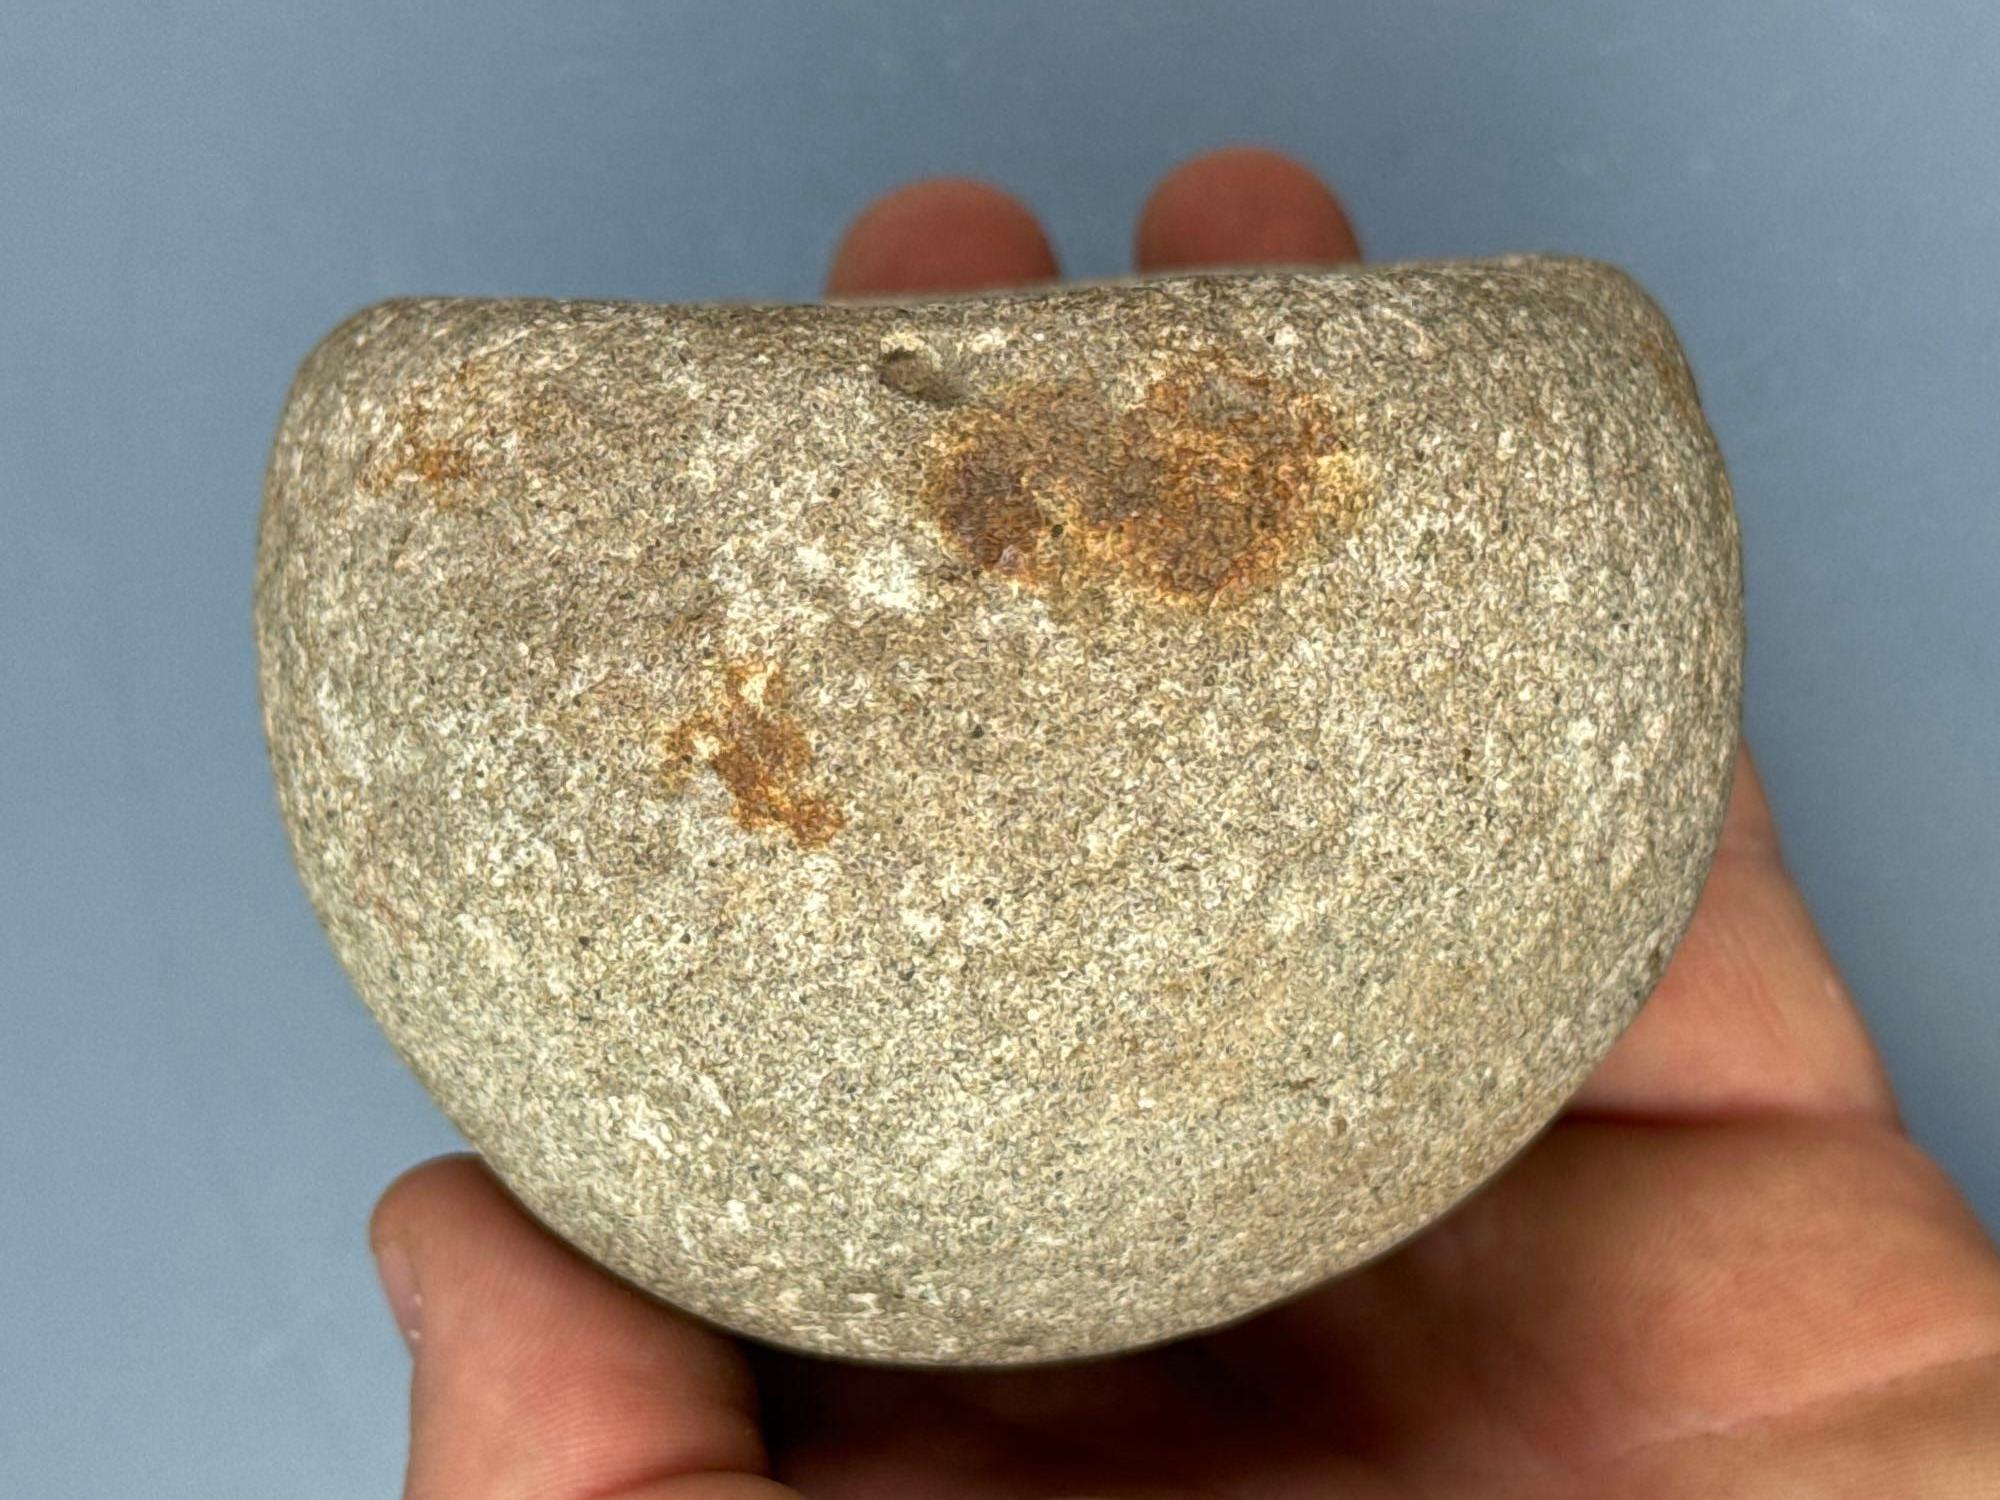 3" x 2 5/8" Stone Mortar, Found in Burlington Co., New Jersey, Nicely Made